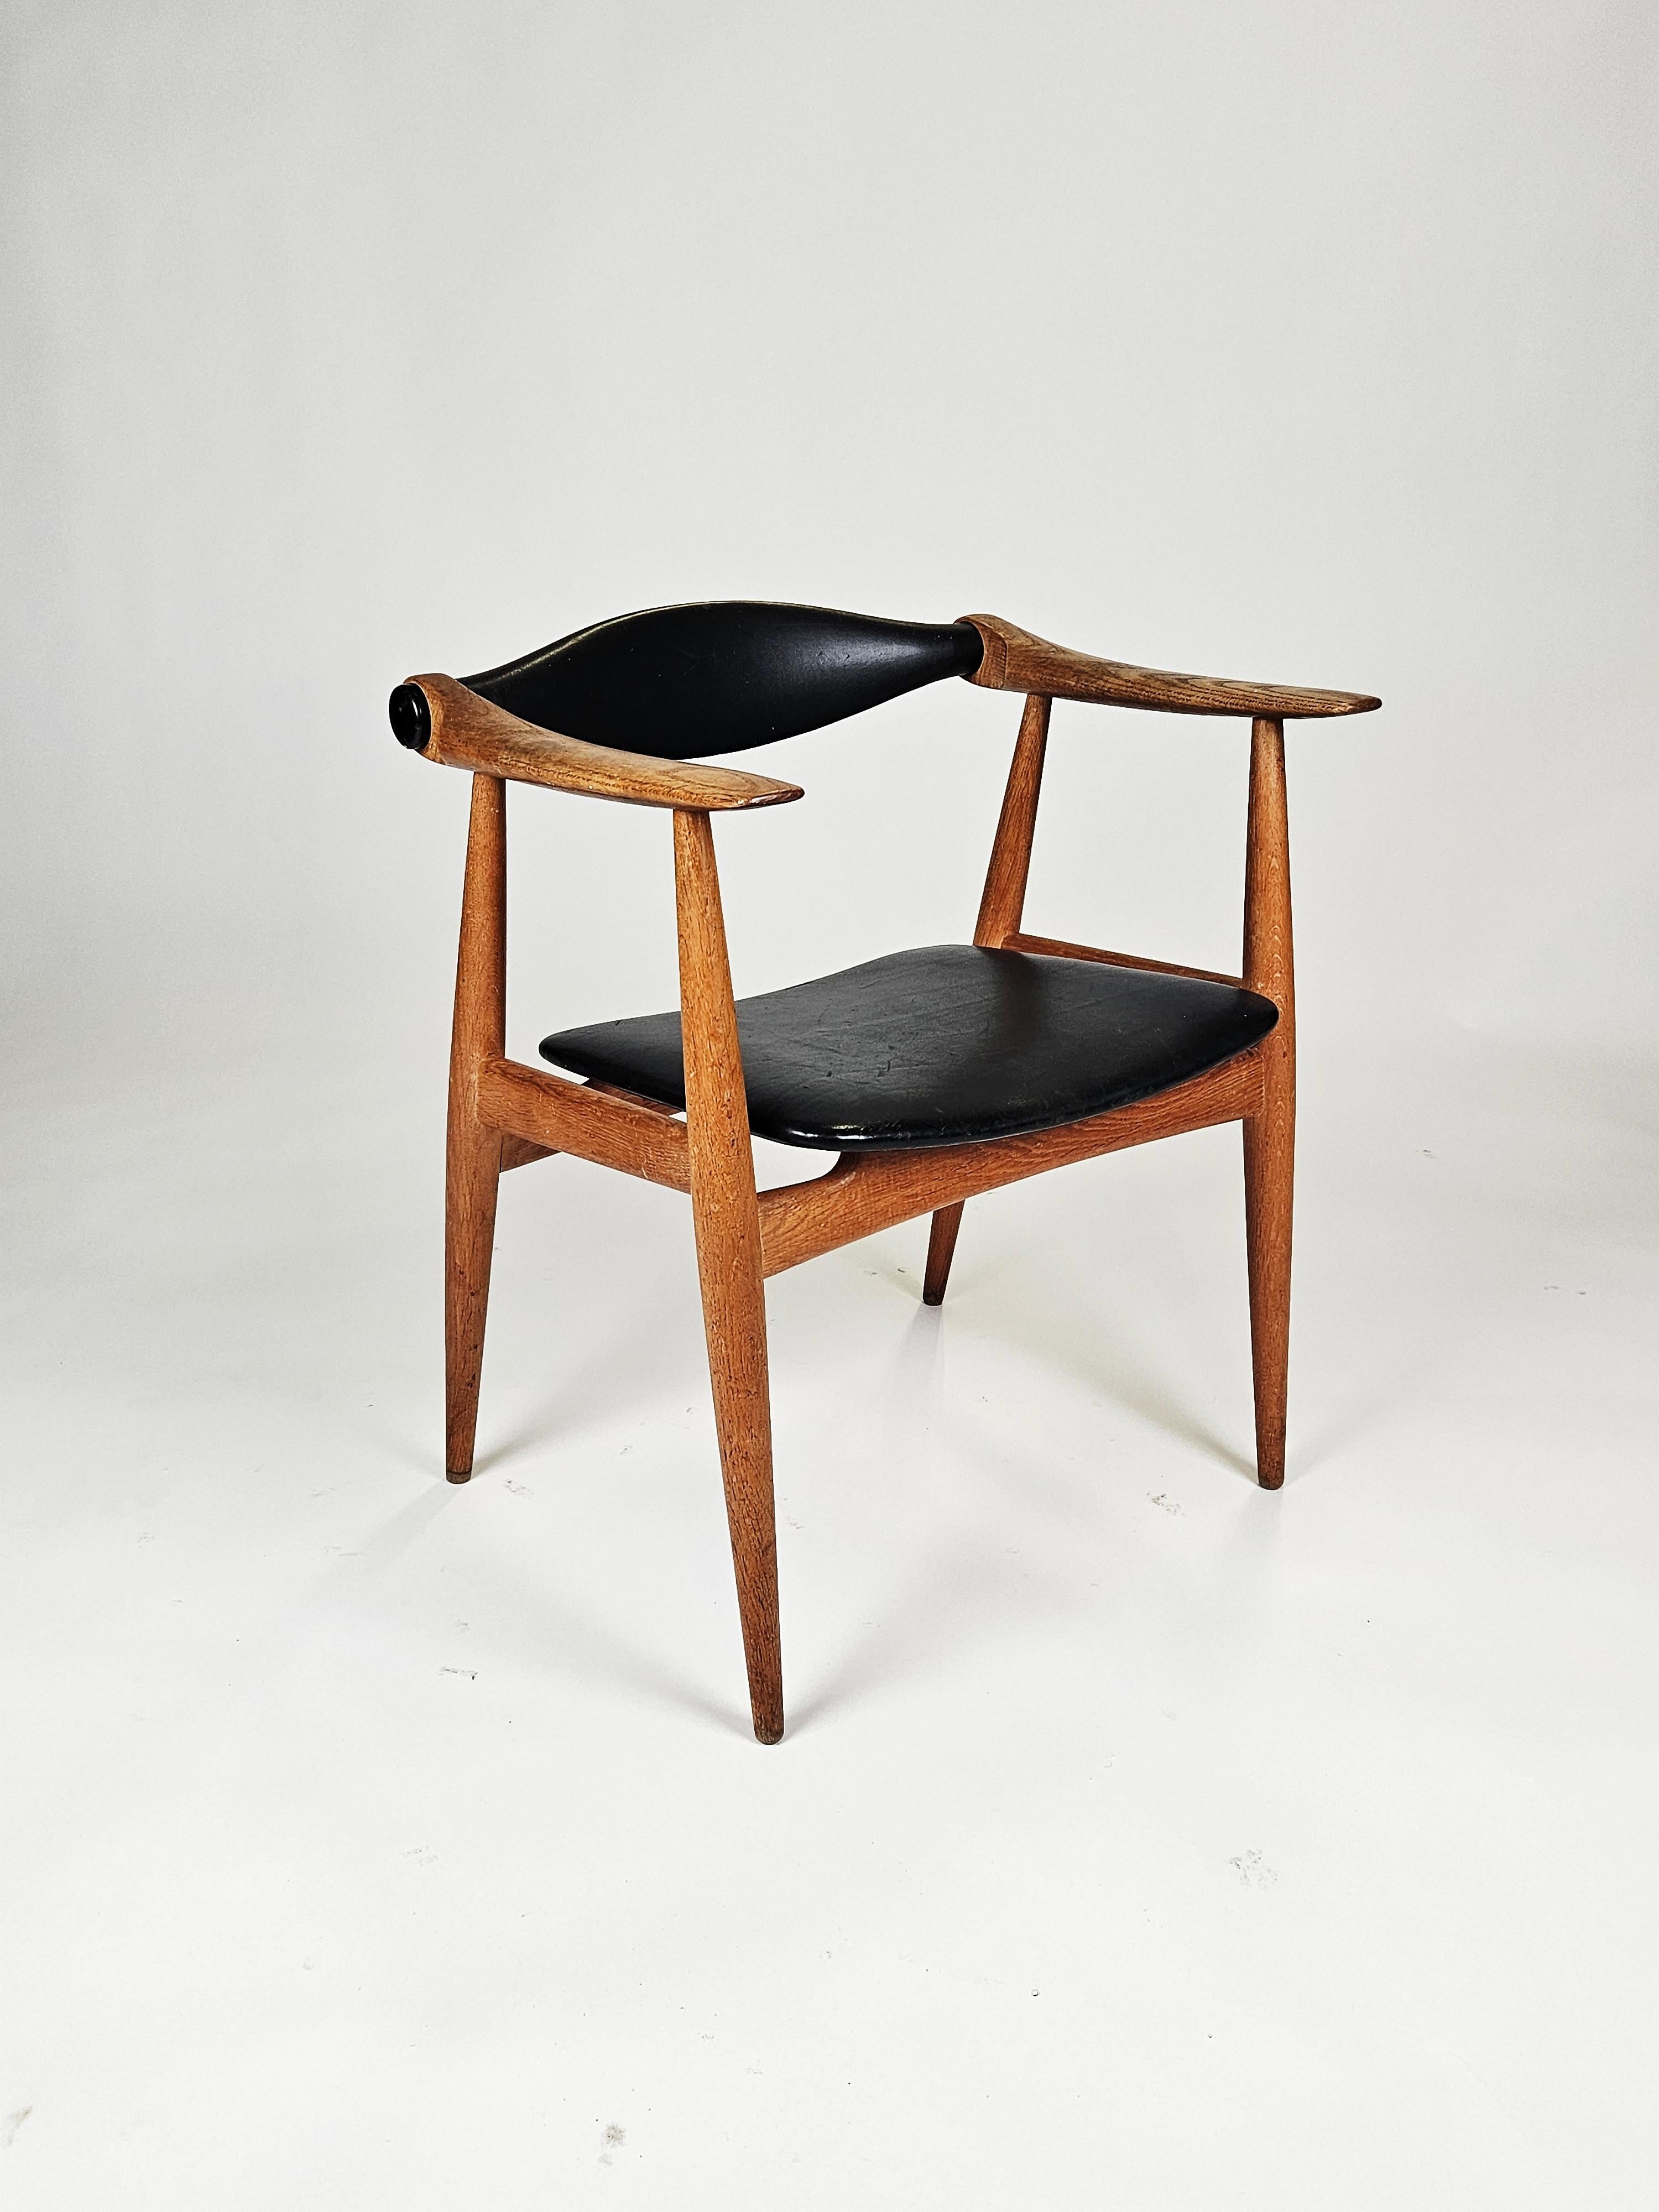 Rare oak and leather armchair model 'CH-34' designed by Hans J. Wegner and produced by Carl Hansen & Son, Denmark, 1960s. 

Made in solid oak with tapered legs. Original black leather upholstery. Great original patina.

Makers mark on bottom of